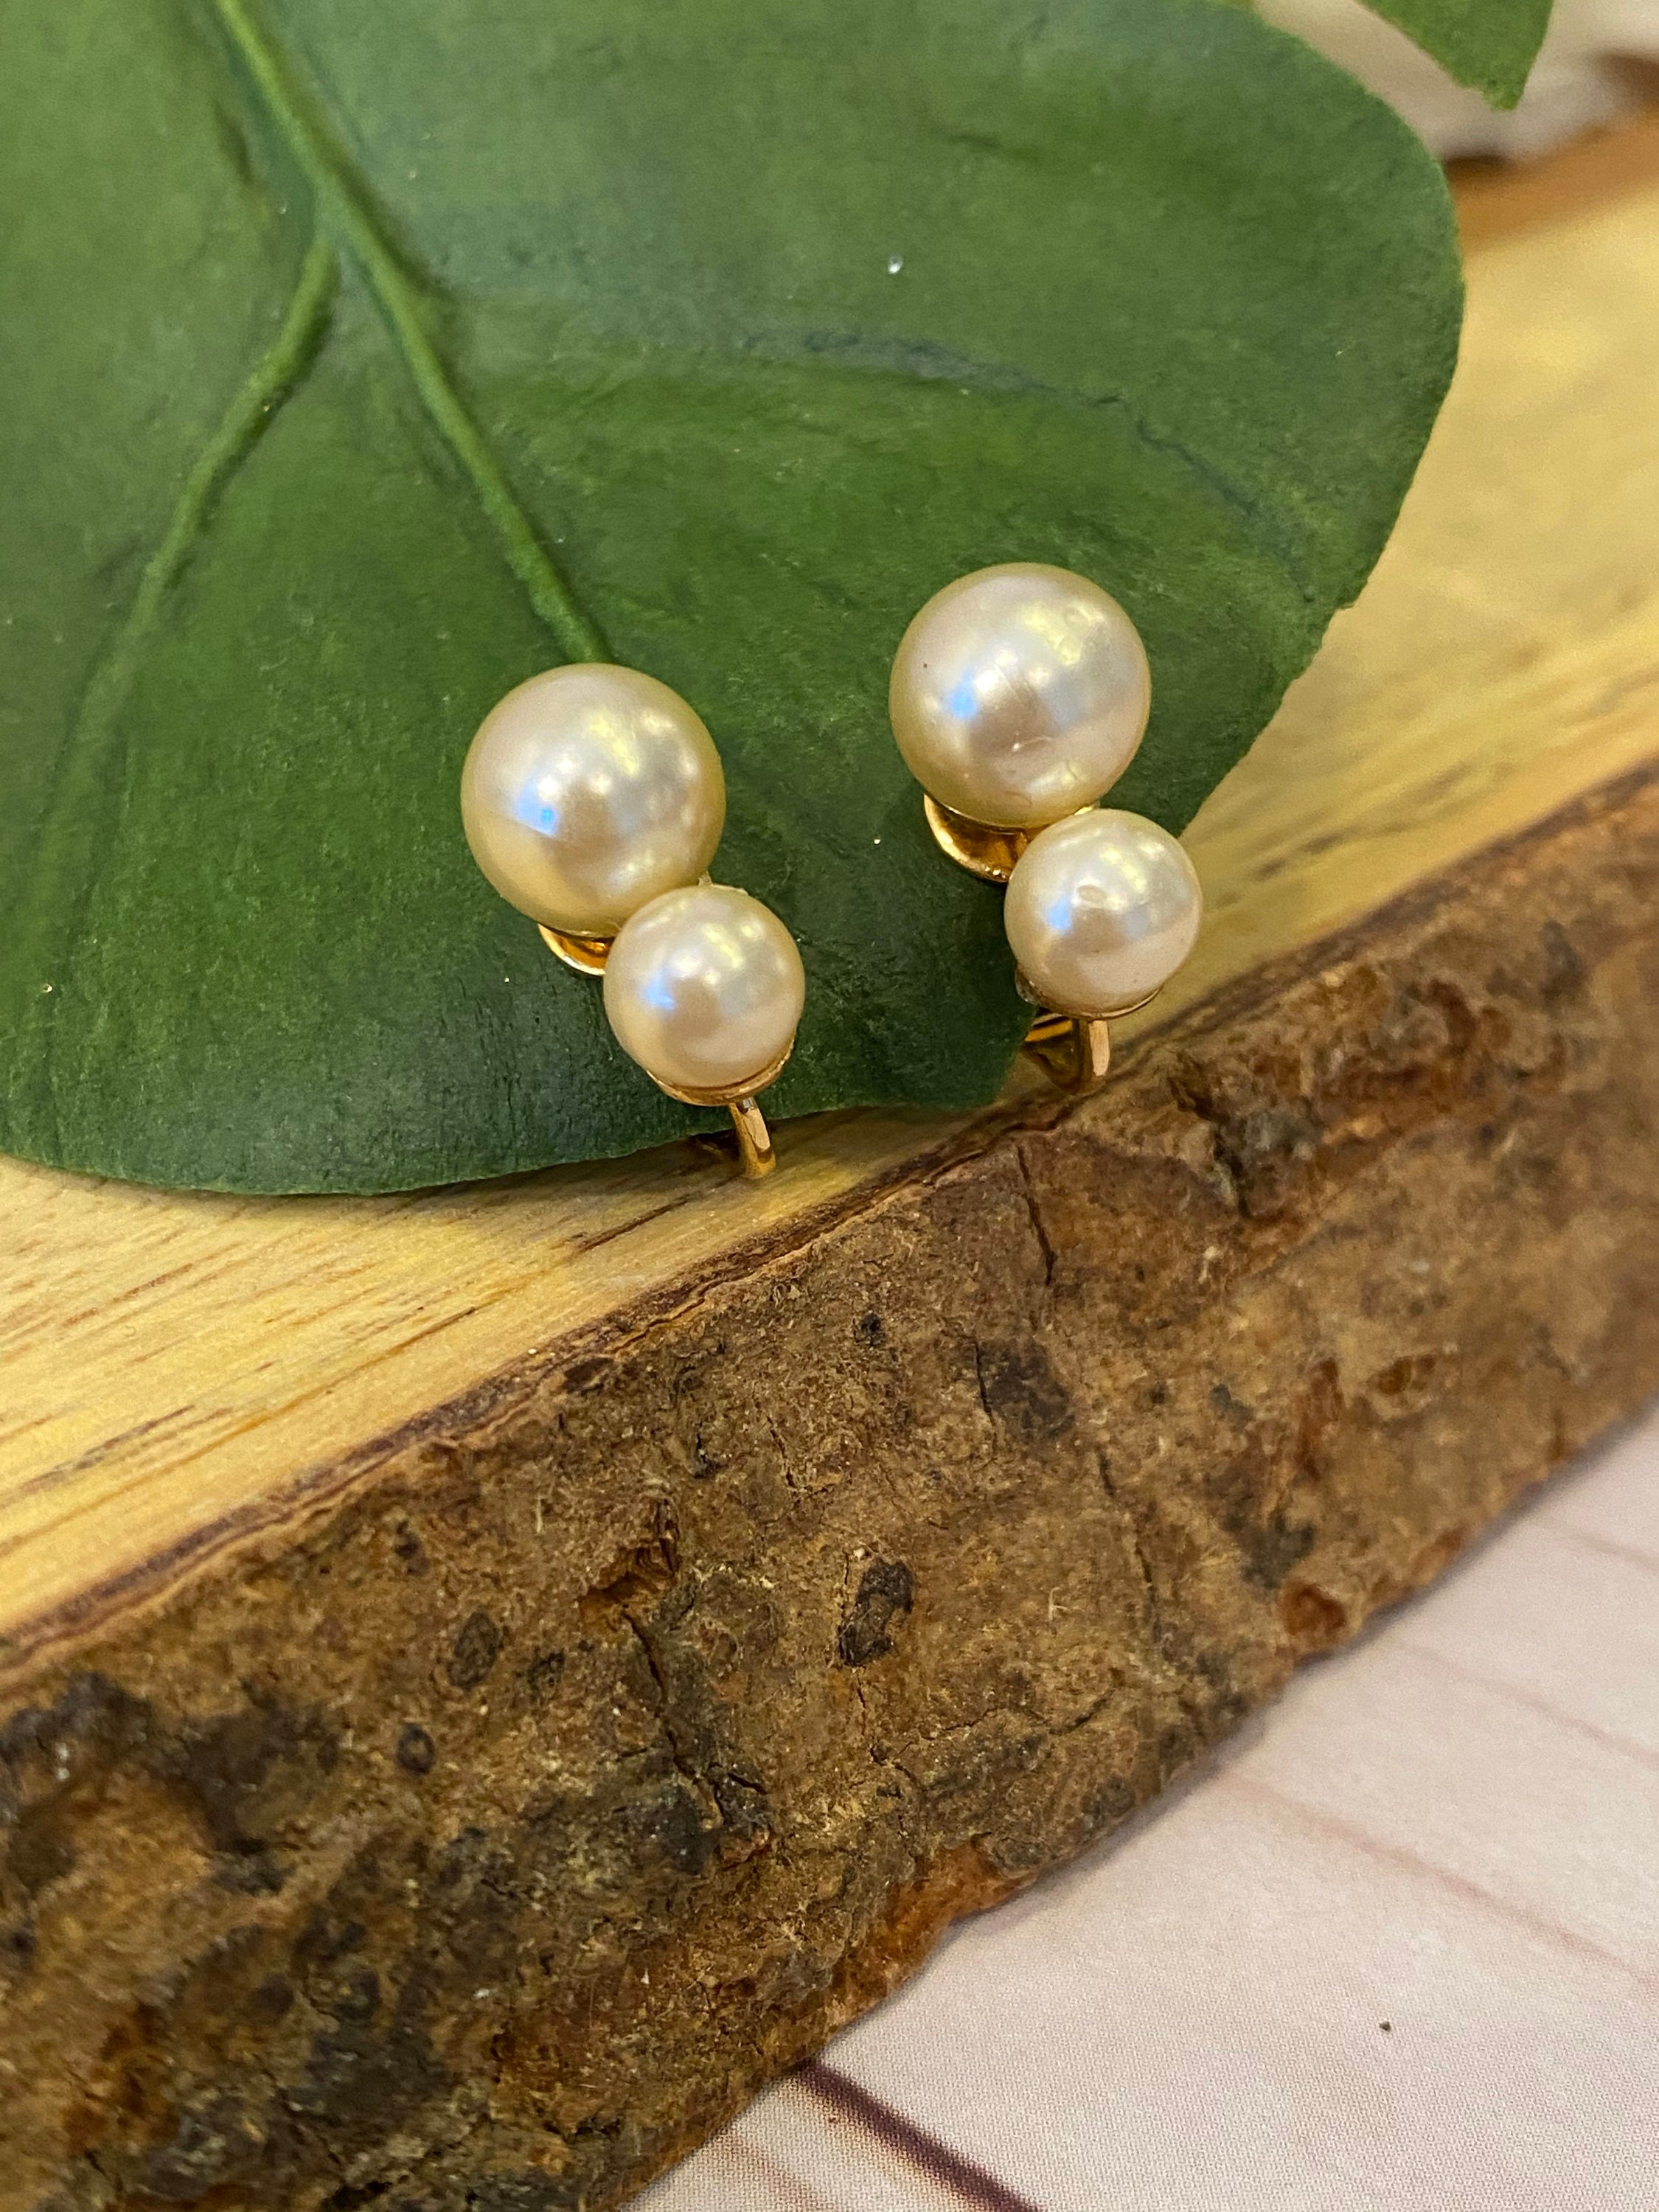 Clip-on stud earrings - Metal & glass pearls, gold, beige & pearly